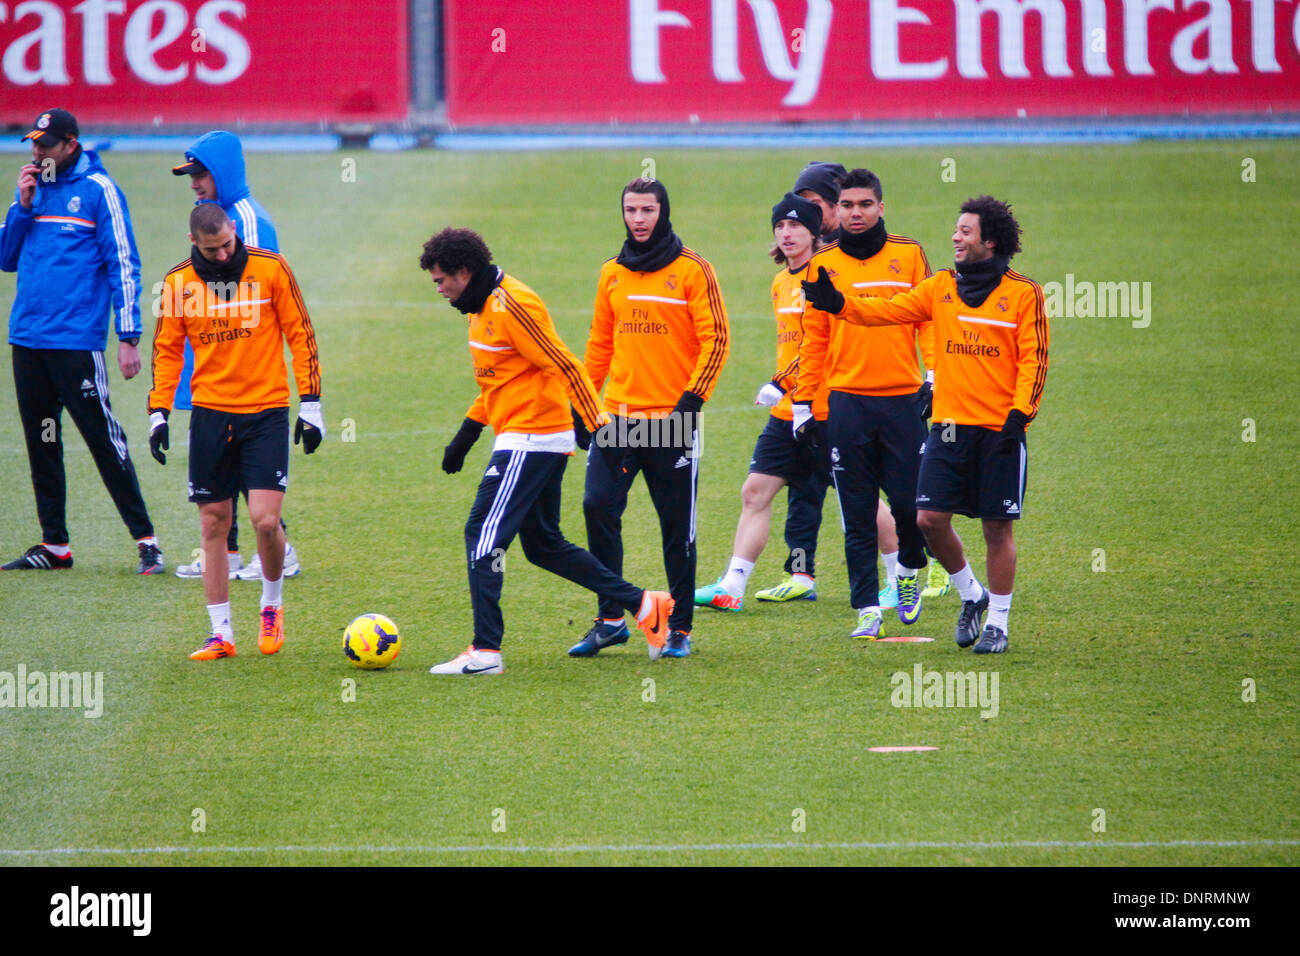 Madrid, Spain. 5th Jan, 2014. (From left to right) players Benzema, Pepe, Cristiano Ronaldo, Modric, Coentrao, Casemiro and Marcelo at a Real Madrid training session at the Valdebebas sports complex ahead of the Liga match between Real Madrid and Celta Vigo, on January 5th, 2014 in Madrid, Spain Credit:  Madridismo Sl/Madridismo/ZUMAPRESS.com/Alamy Live News Stock Photo